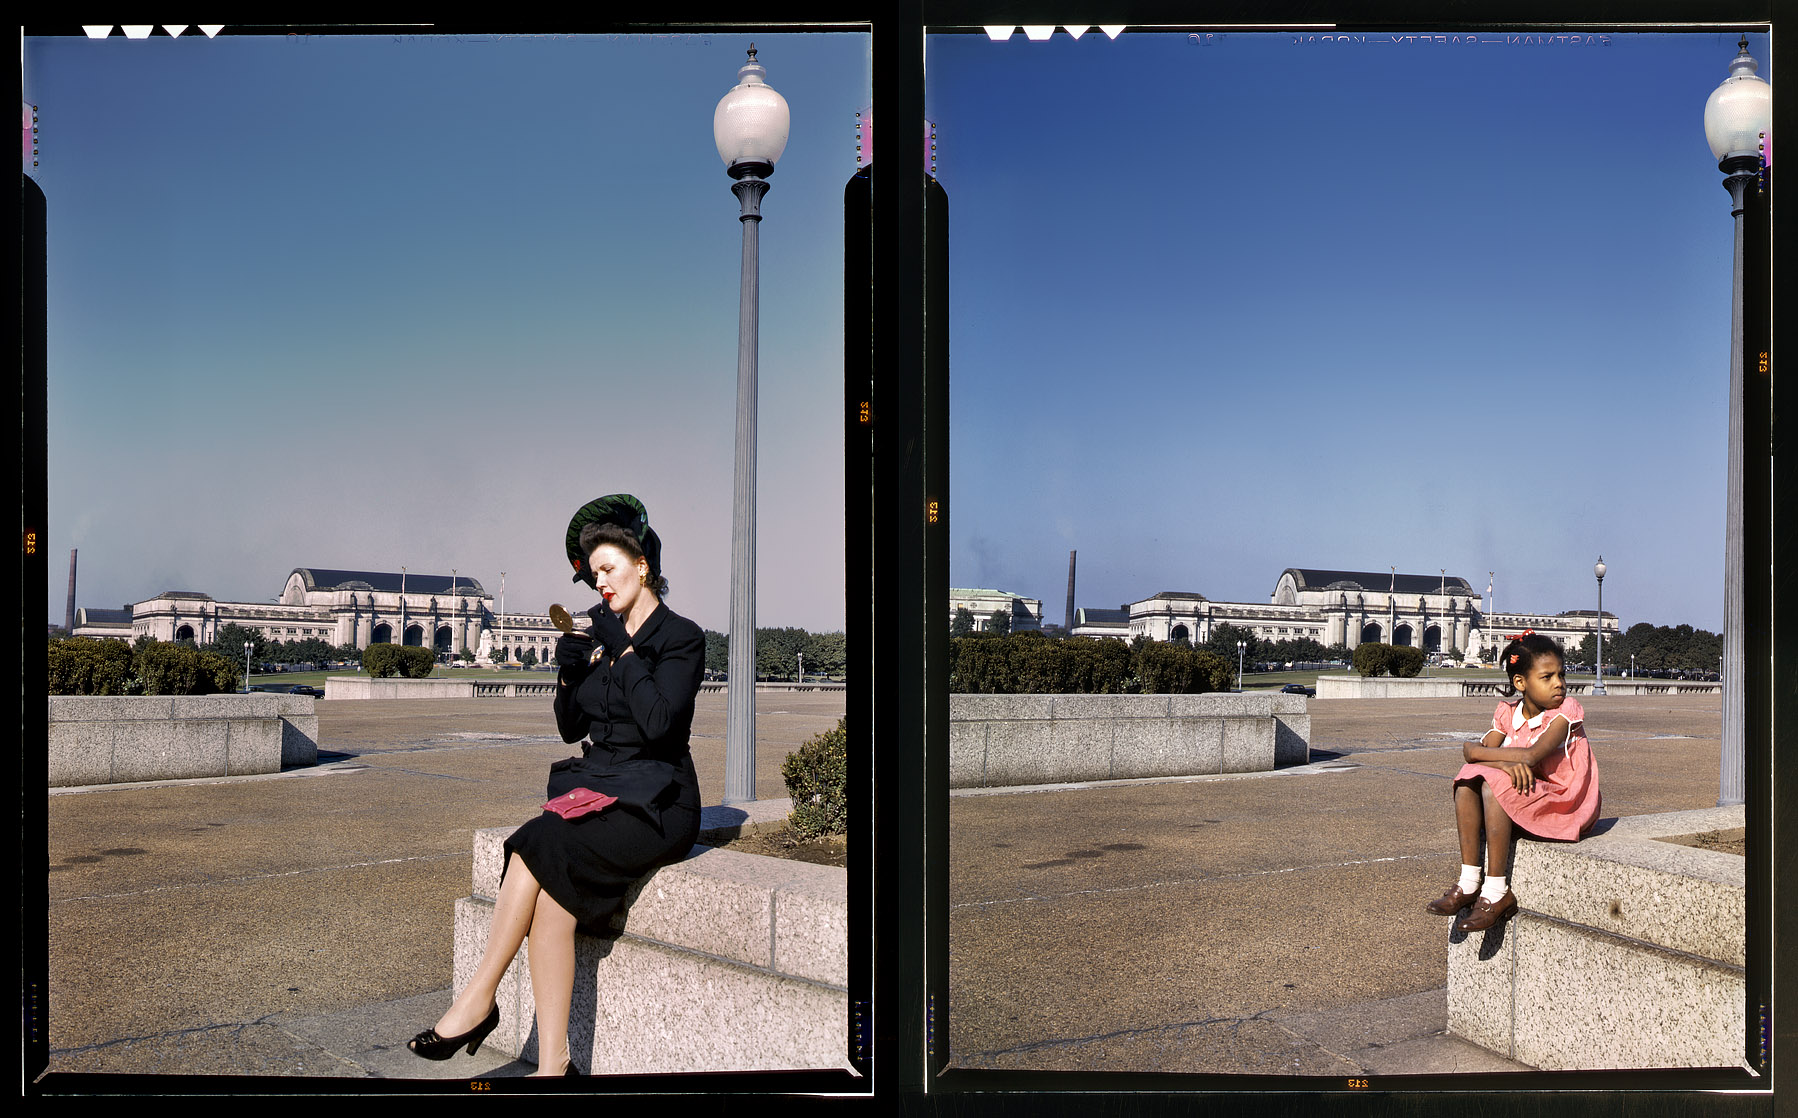 Washington, 1943. A study in contrasts at Union Station. View full size. 4x5 Kodachrome transparencies, photographer unknown. Office of War Information.